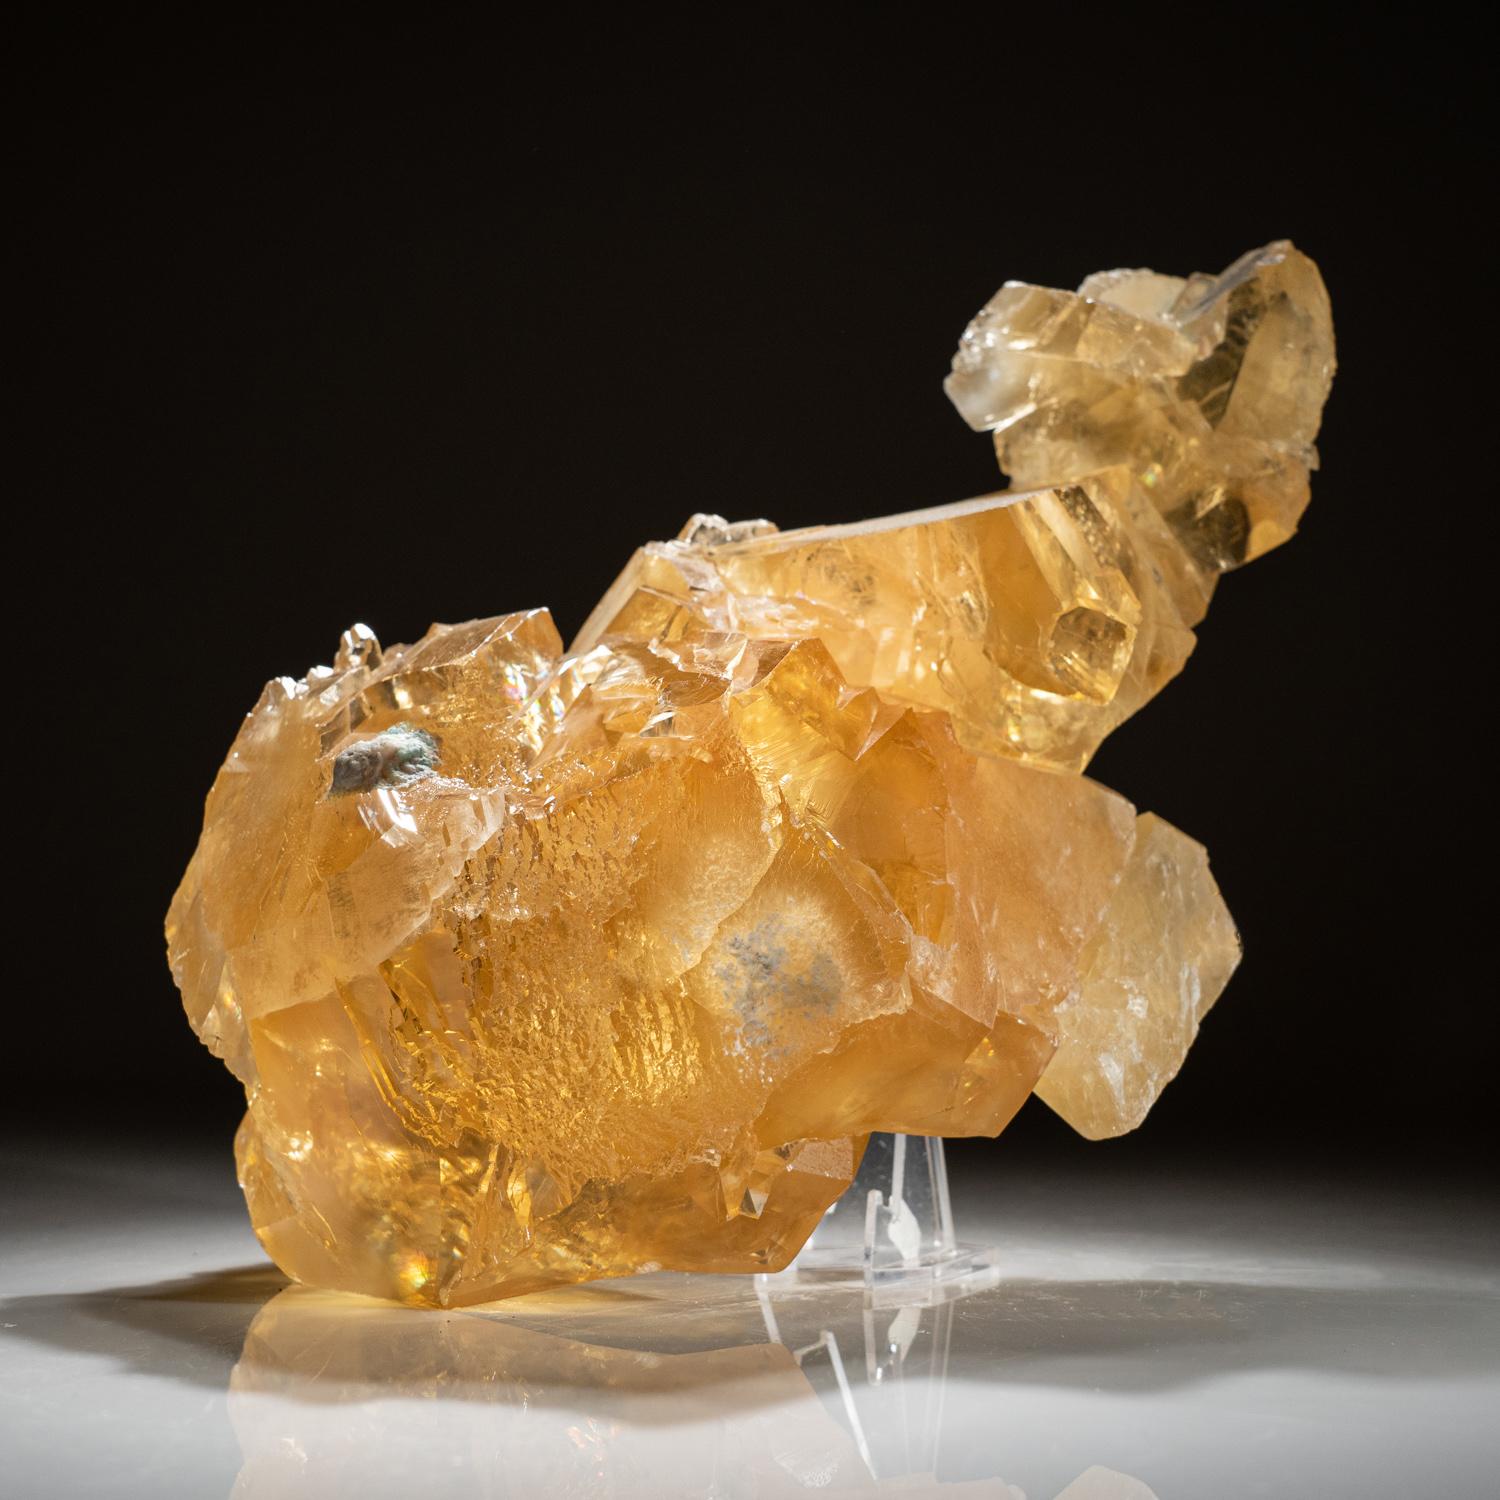 Chinese Golden Calcite From Tieshan District, Huangshi Prefecture, Hubei Province, China For Sale